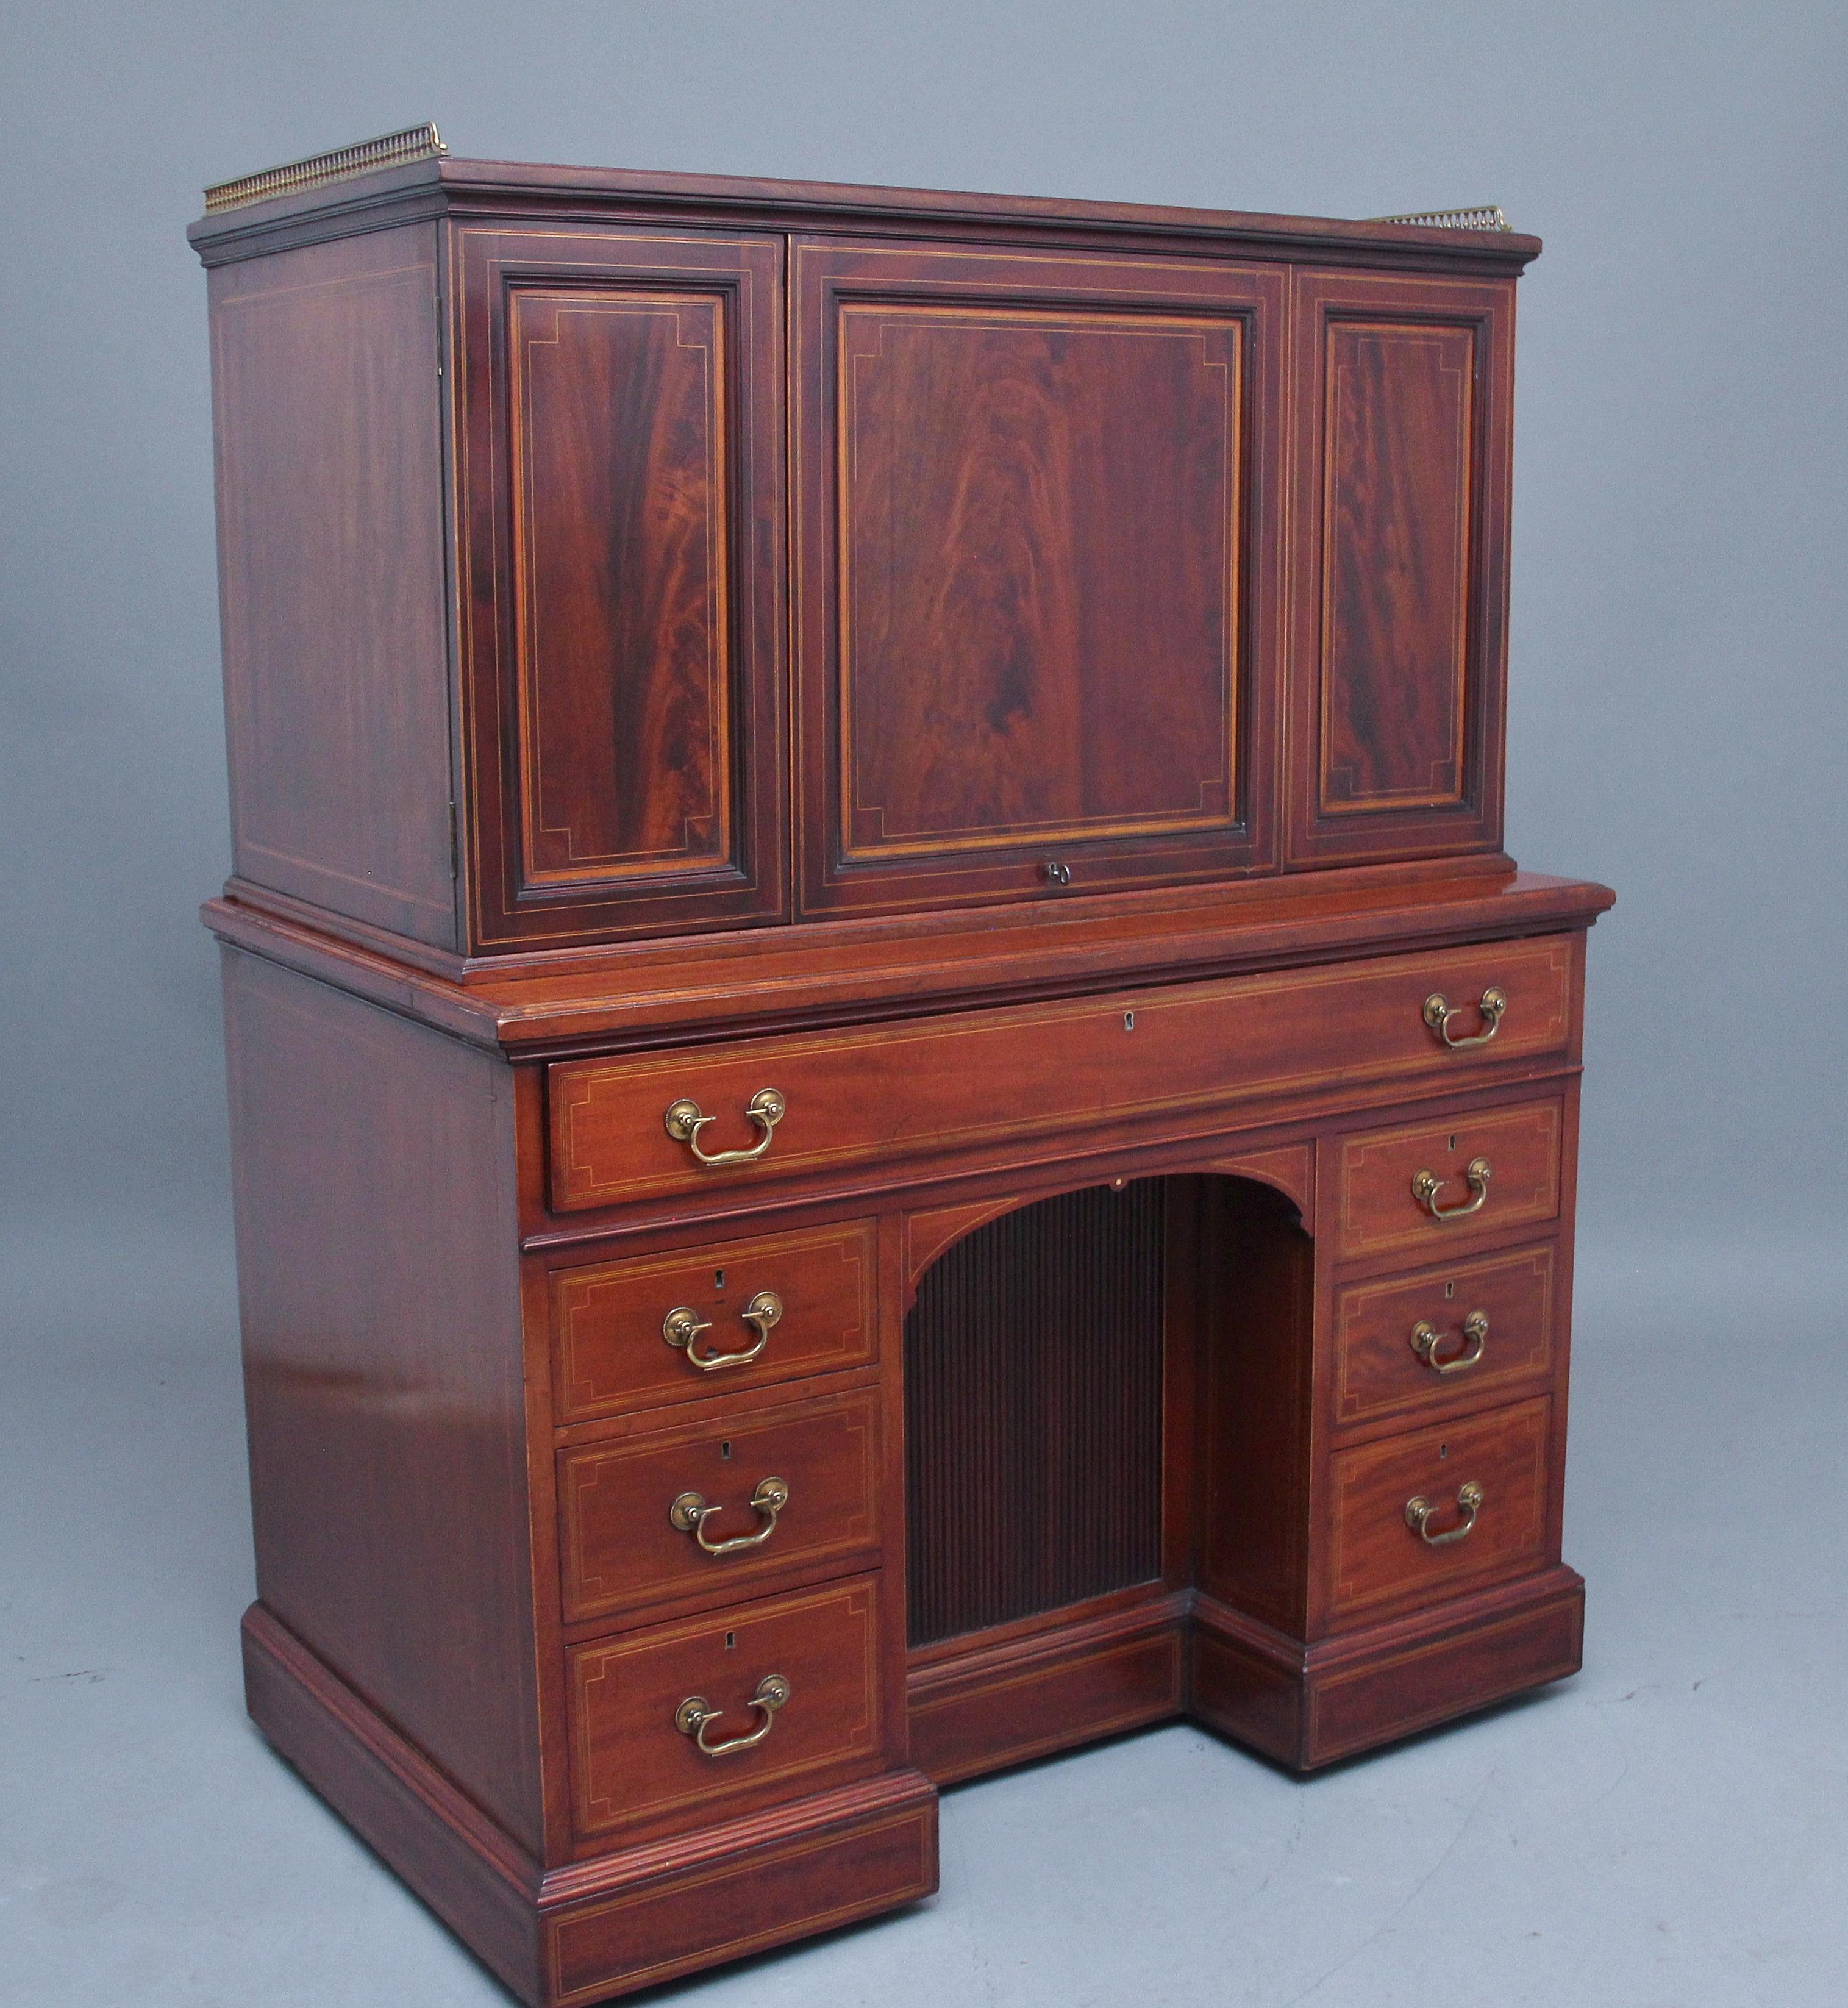 A superb quality 19th century mahogany secretaire desk cabinet, the top section having a brass gallery running along the back and sides, having three moulded and inlaid panels at the front with lovely figuration, the larger middle panel lifting out